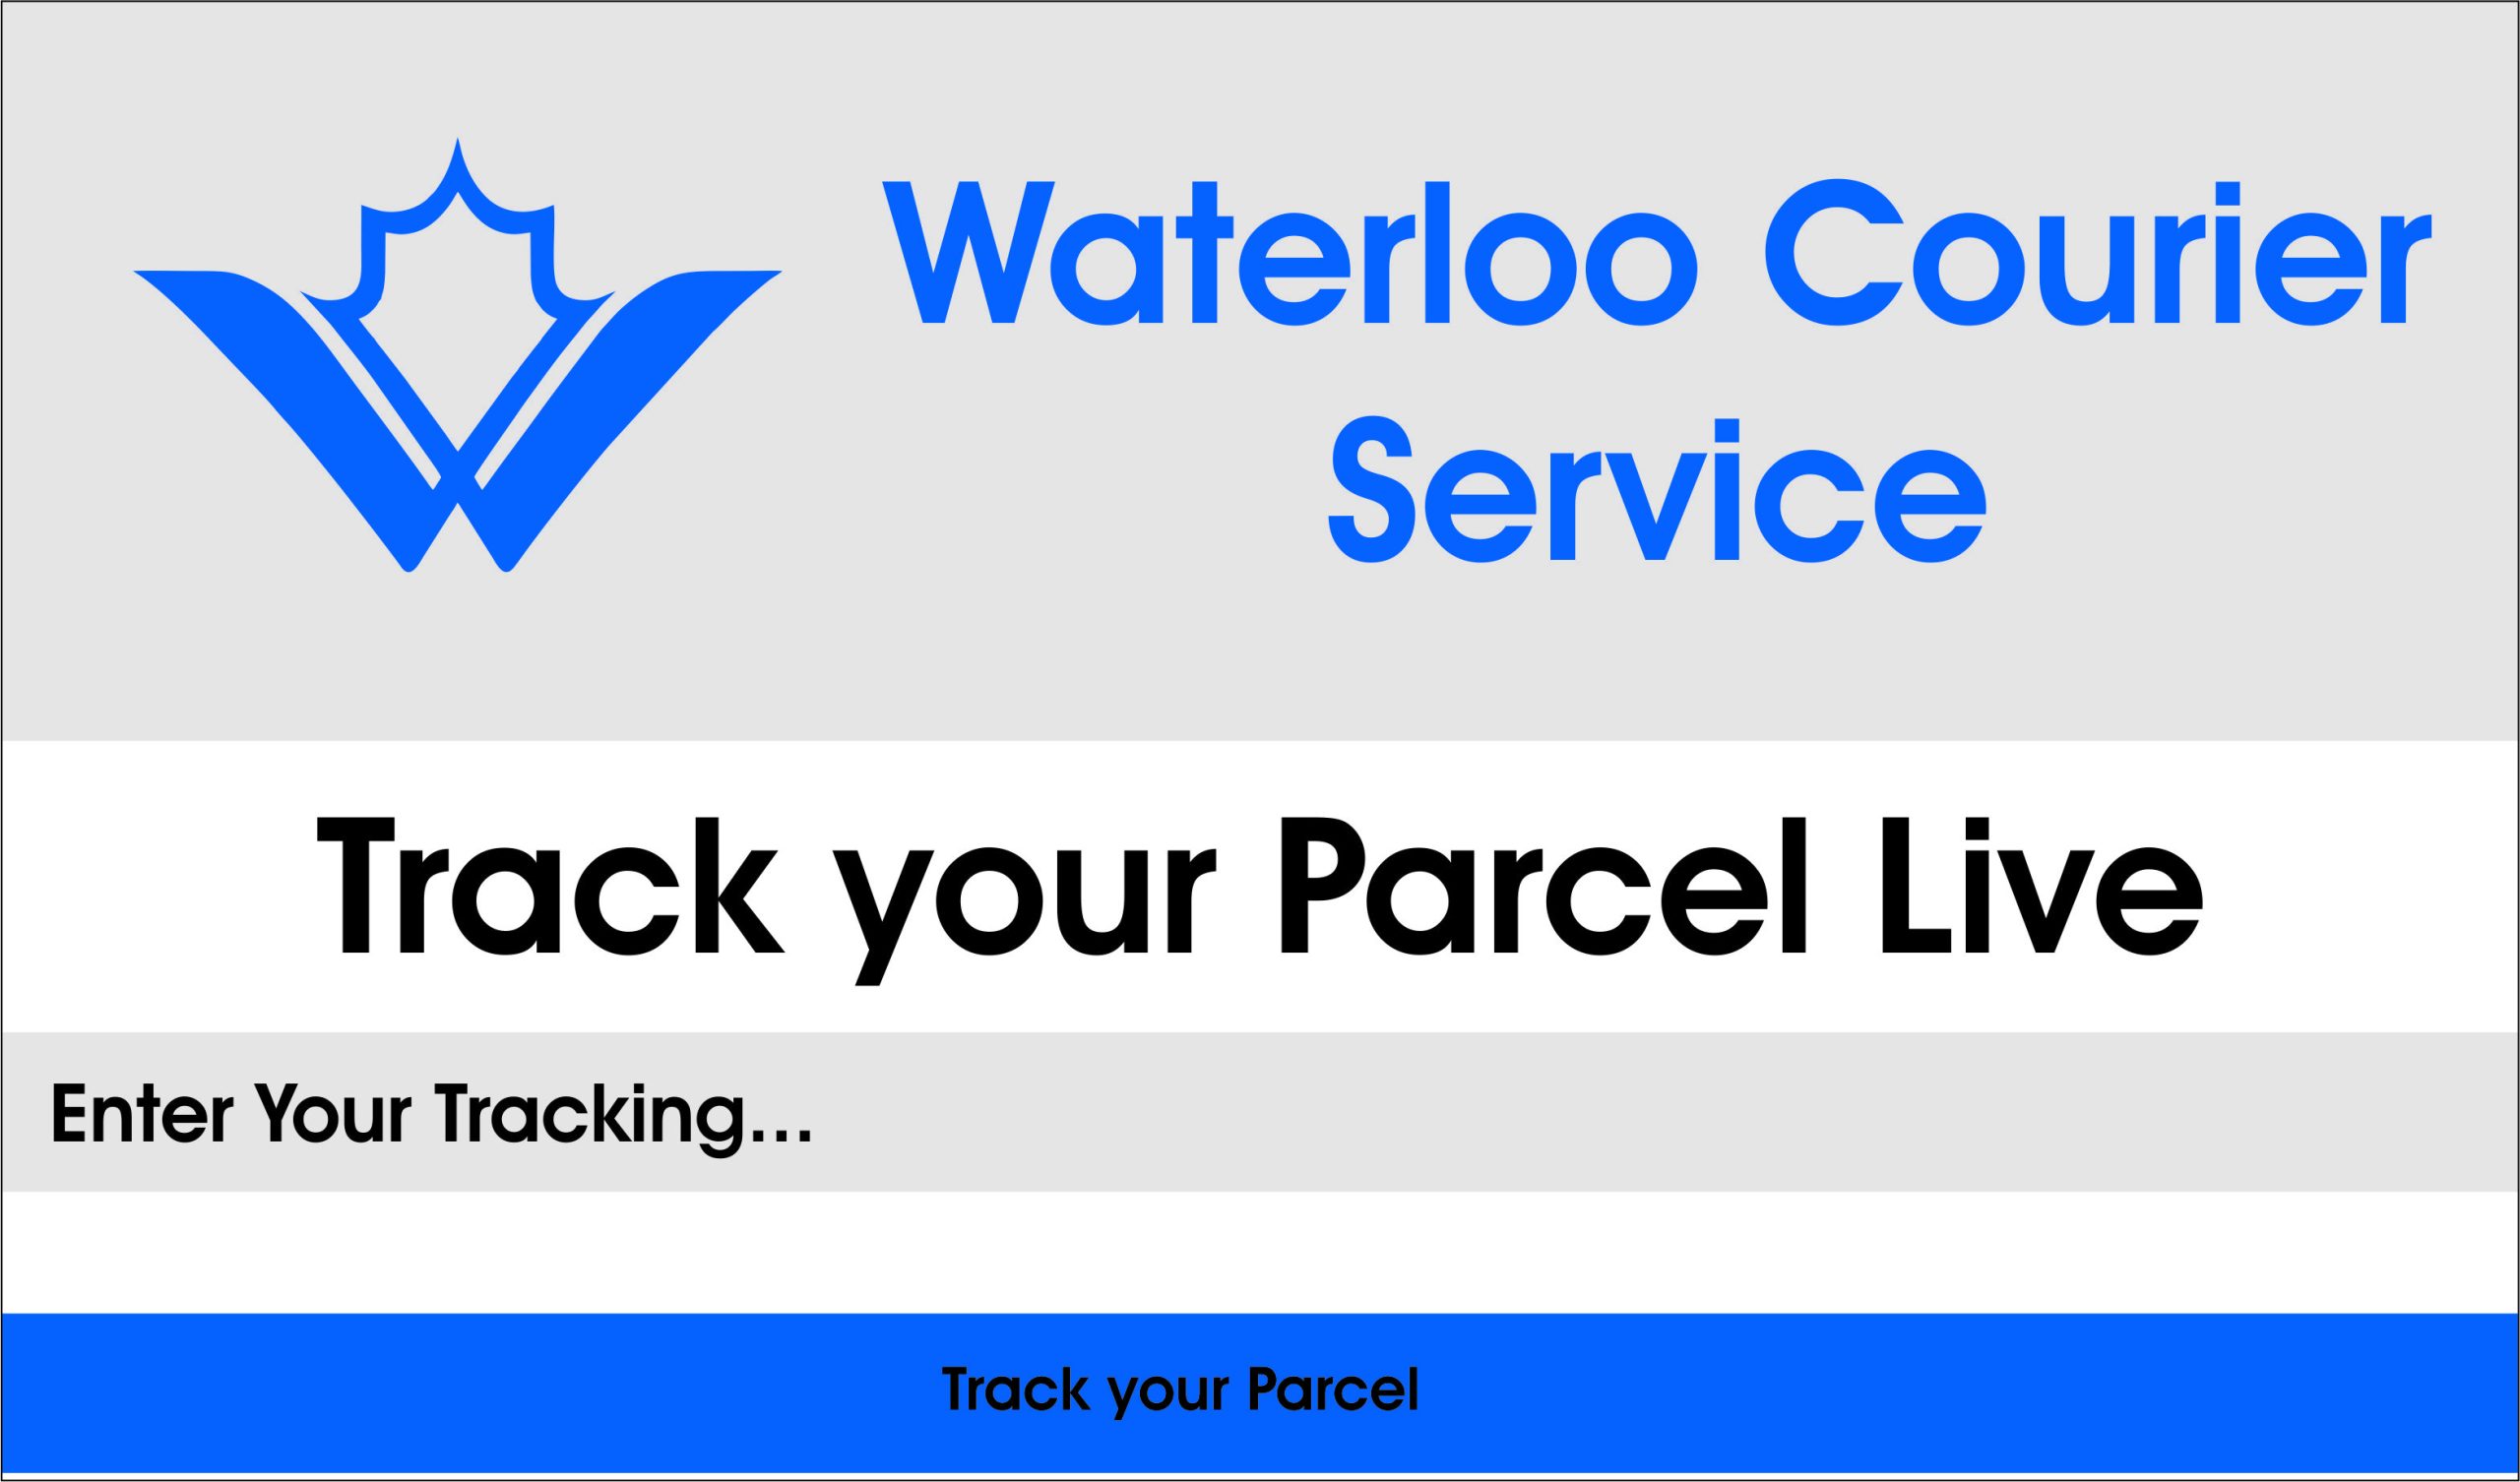 Waterloo Courier Service